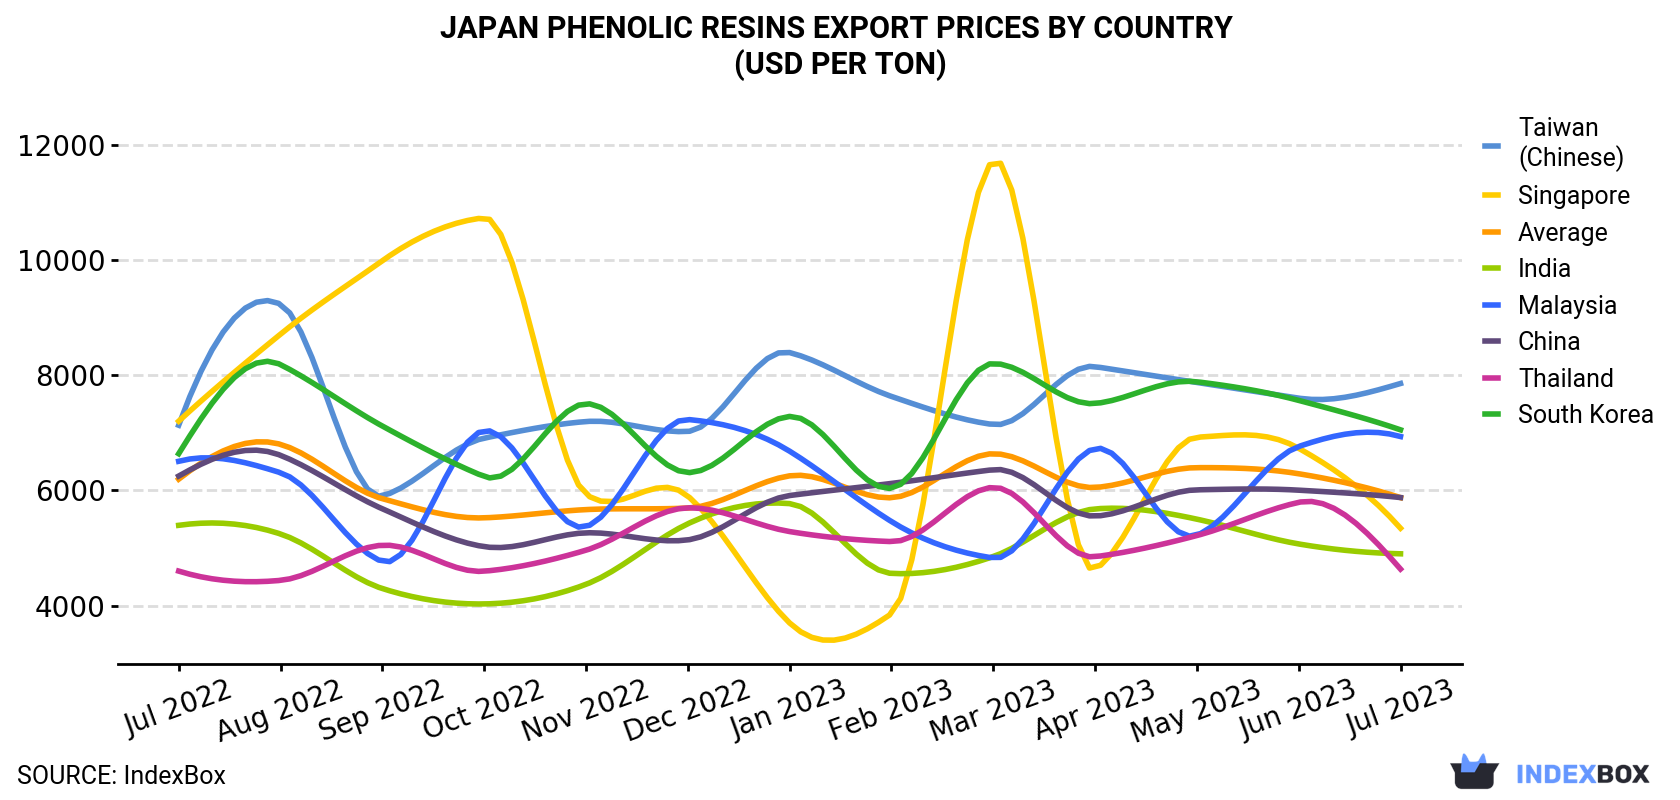 Japan Phenolic Resins Export Prices By Country (USD Per Ton)